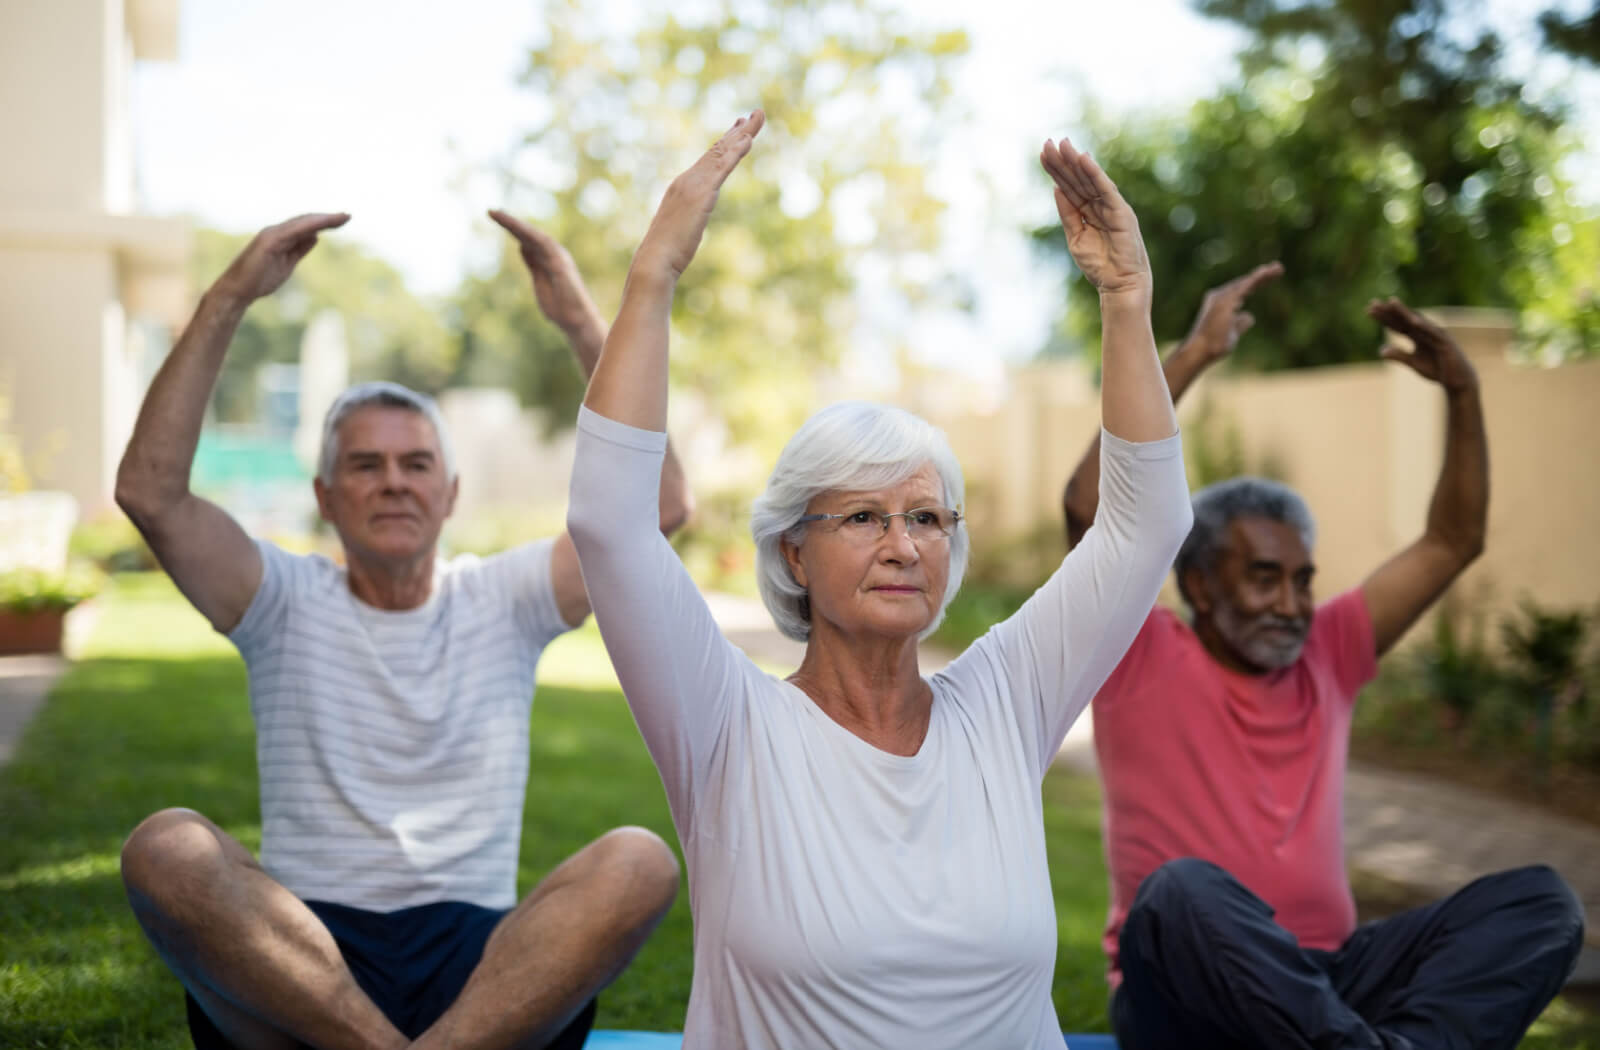 A group of older adults participating in a yoga class outdoors in their independent living community.